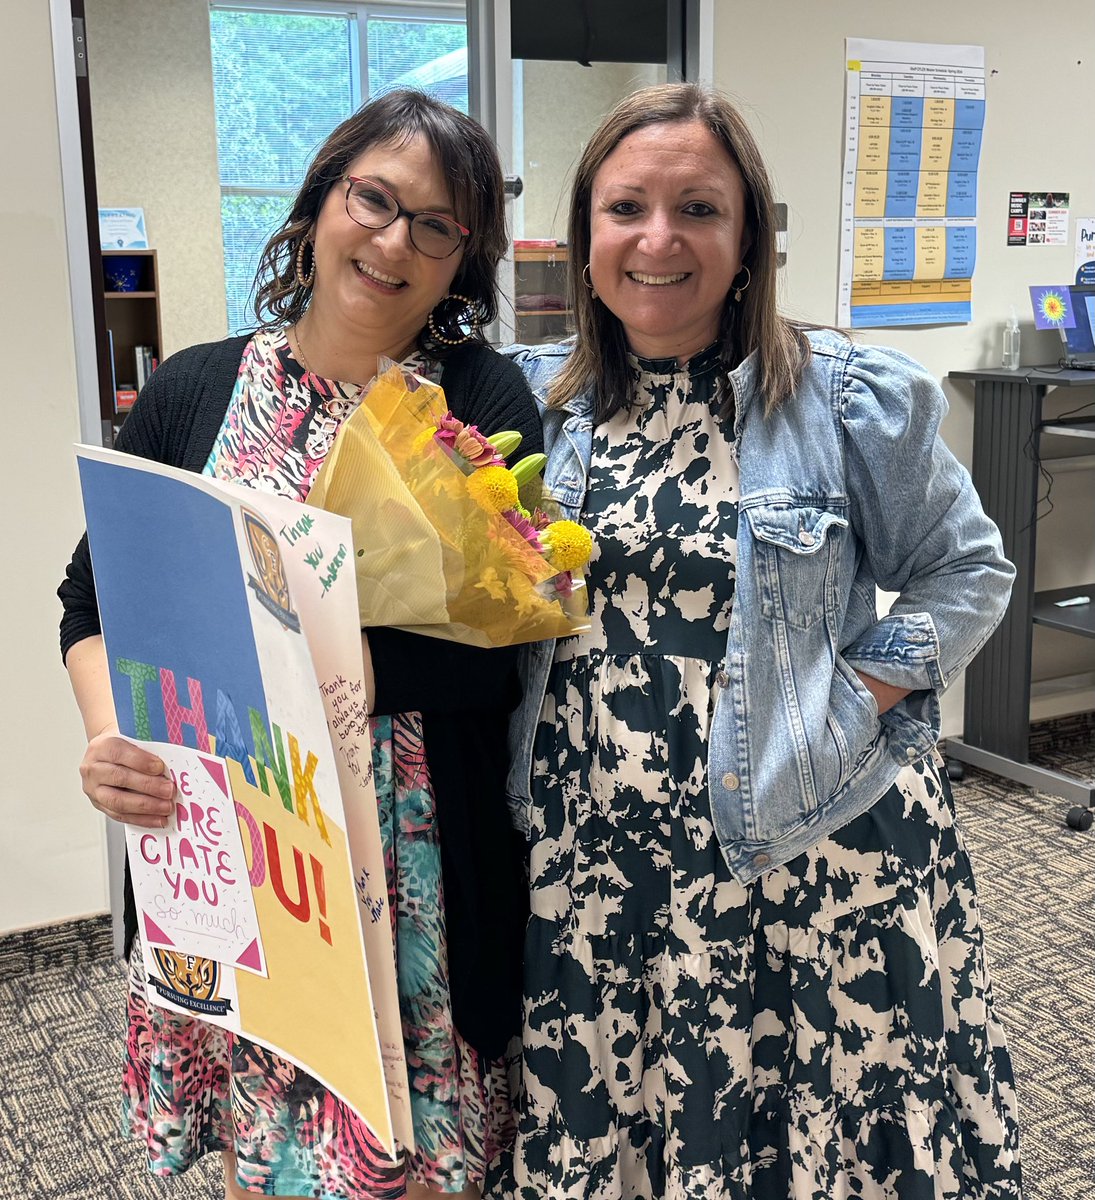 Yesterday we recognized our amazing Data Manager, Ms. Wilkerson! Thank you for everything you do to support the Crossroads FLEX community! @CrossroadsFlex #CRFLEXRISEandSOAR